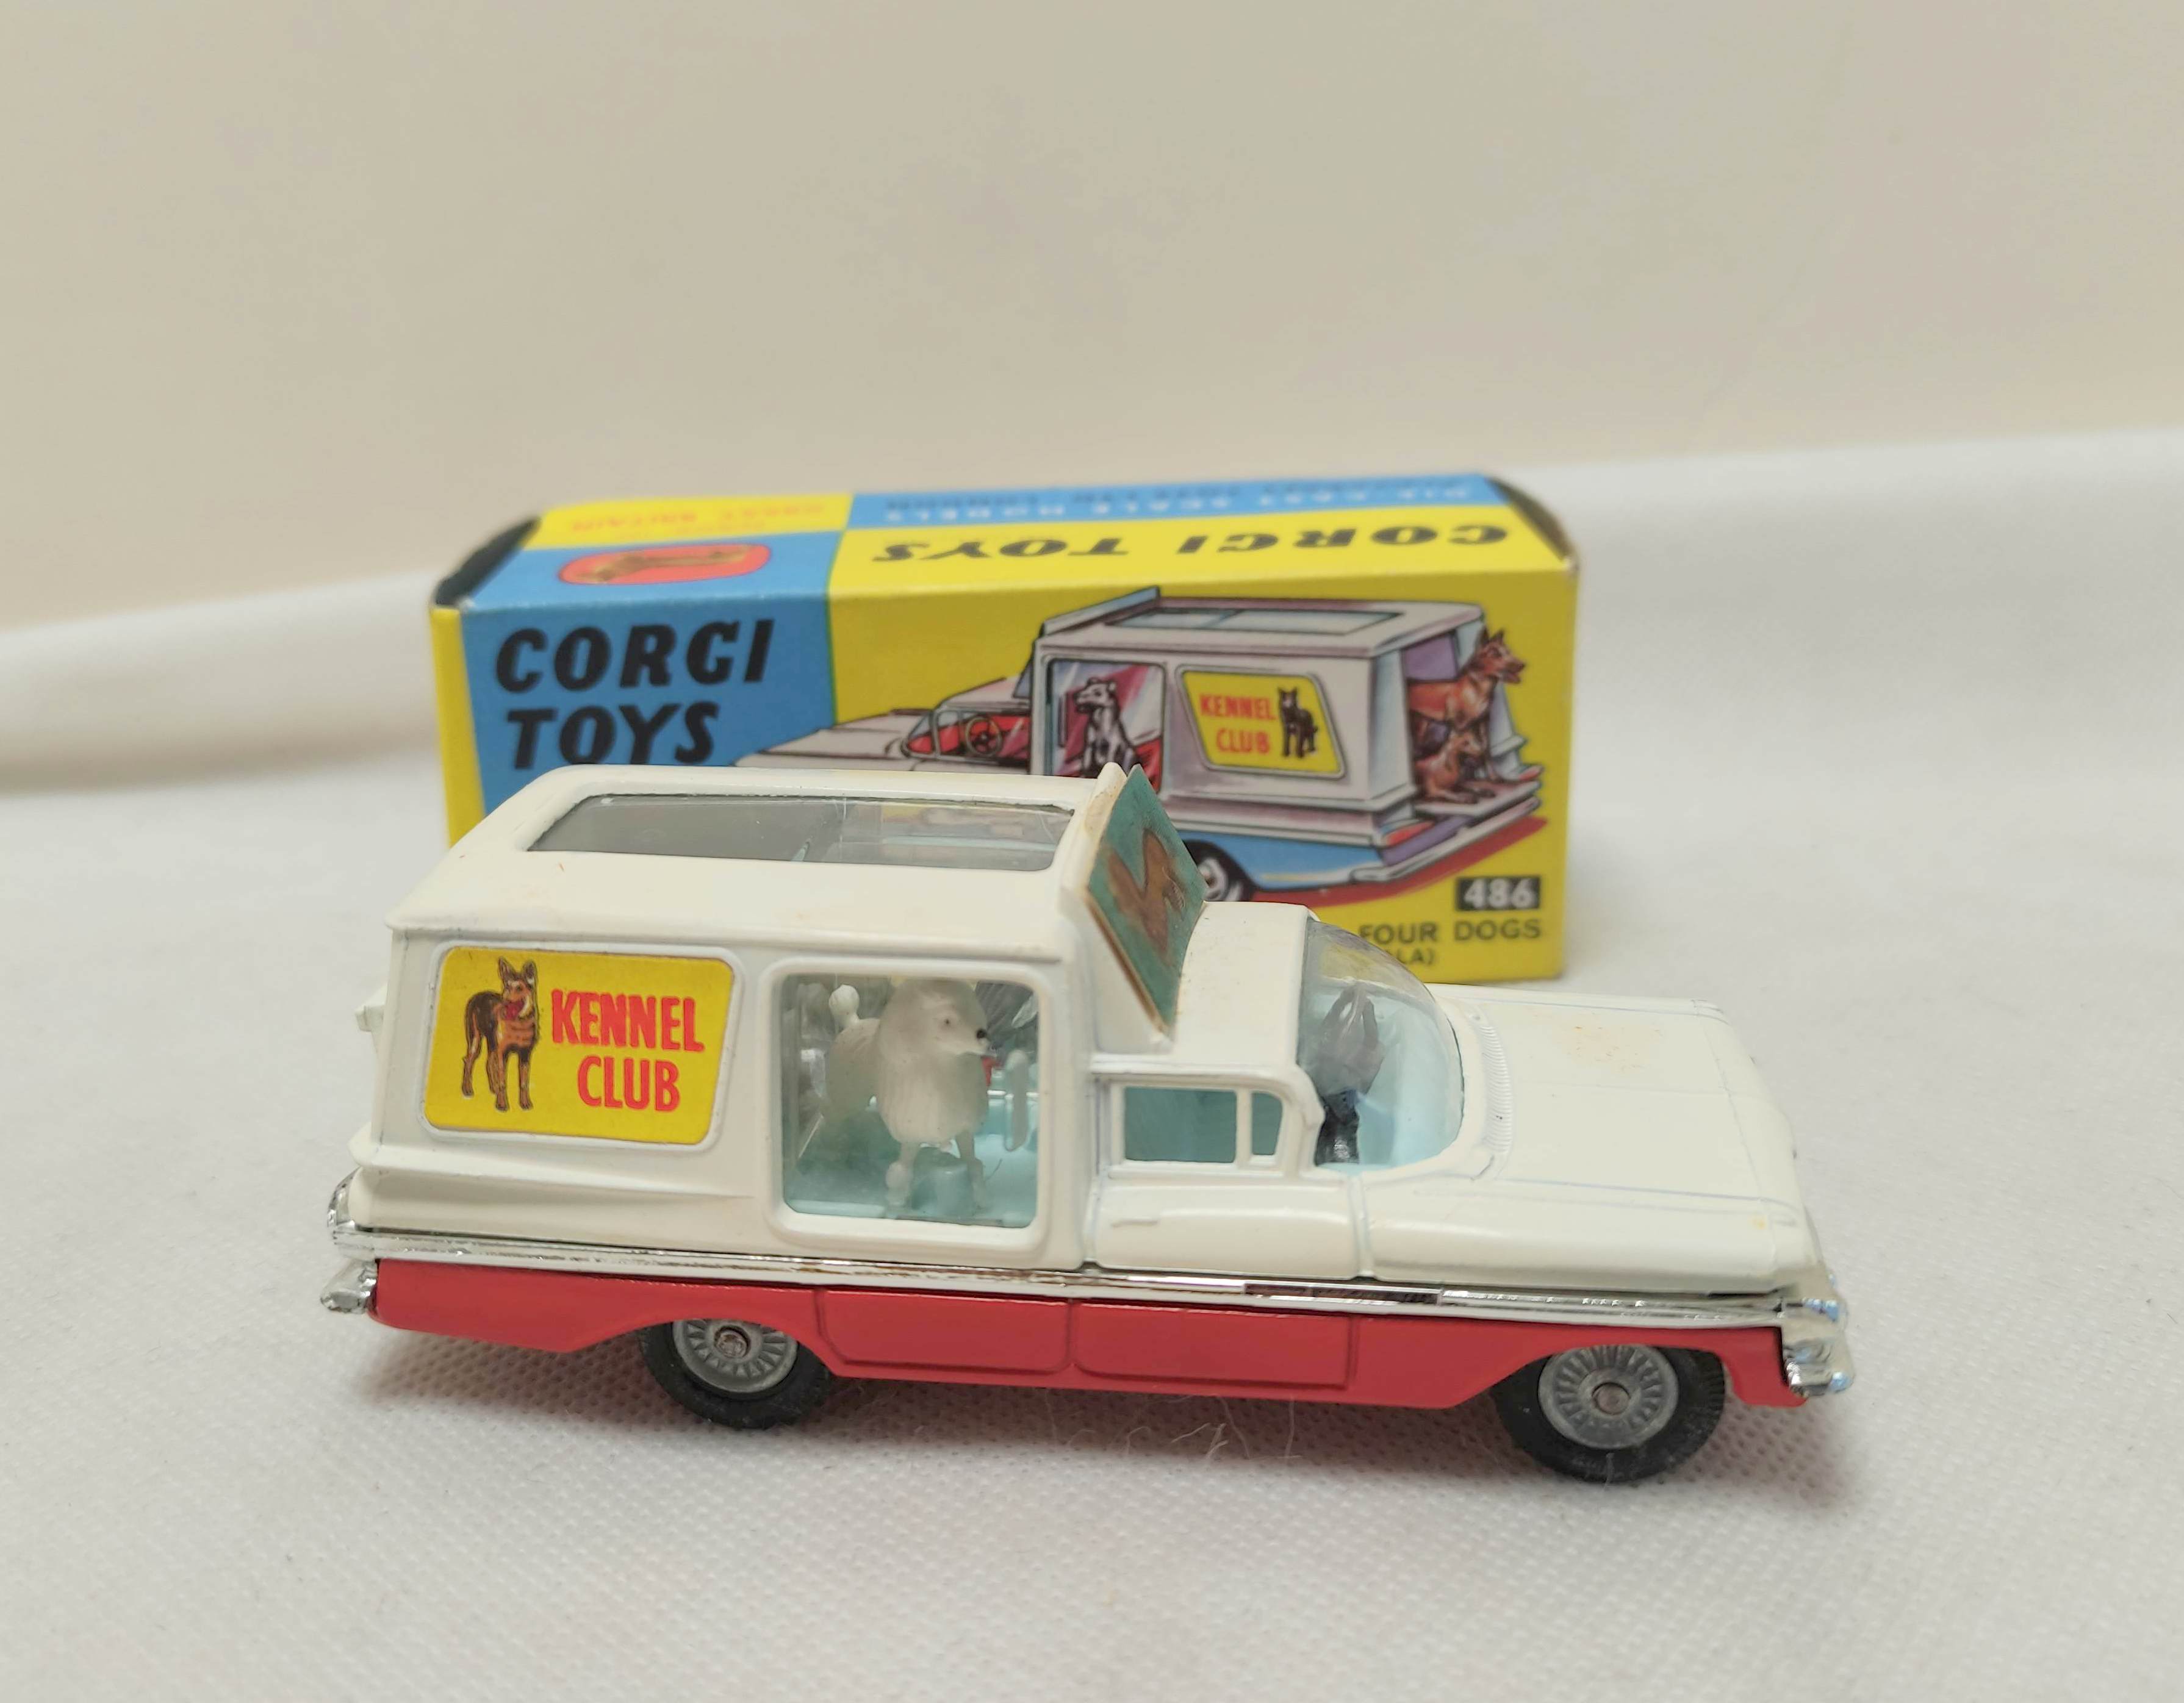 Corgi Toys model 486 Kennel Service Wagon with four dogs based off the Chevrolet Impala. Complete